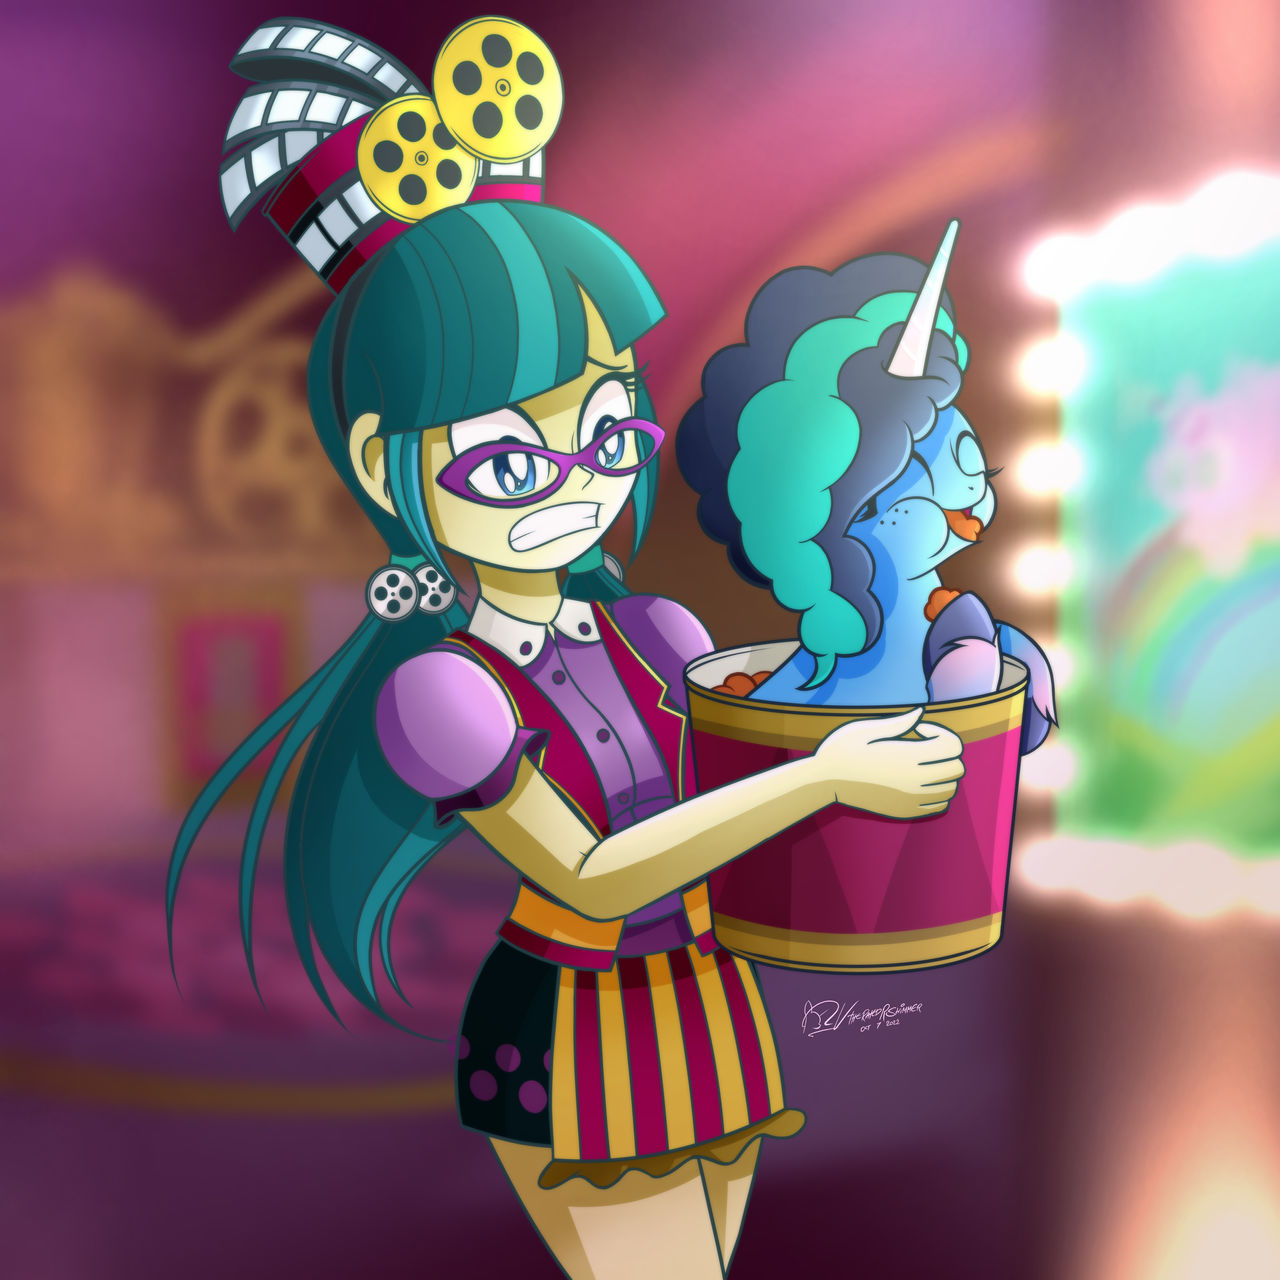 misty_sure_does_love_popcorn_by_theratedrshimmer_dfkl9dx-fullview.jpg